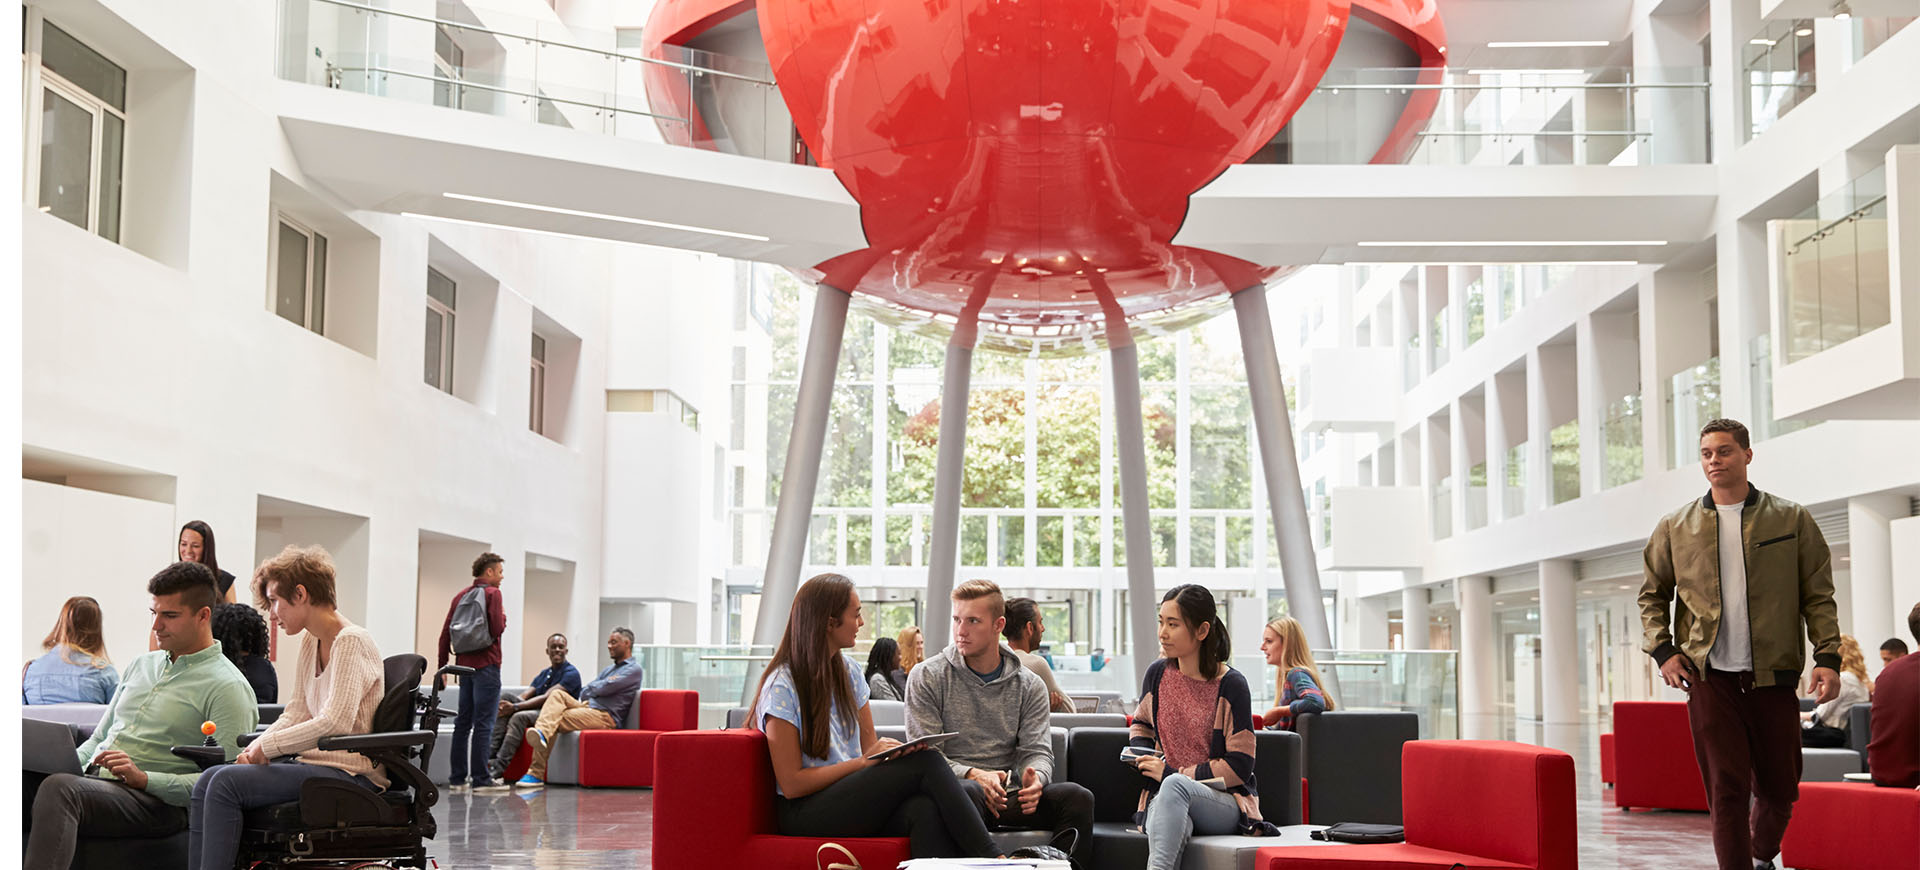 staff and students in the University's atrium of The Spark building